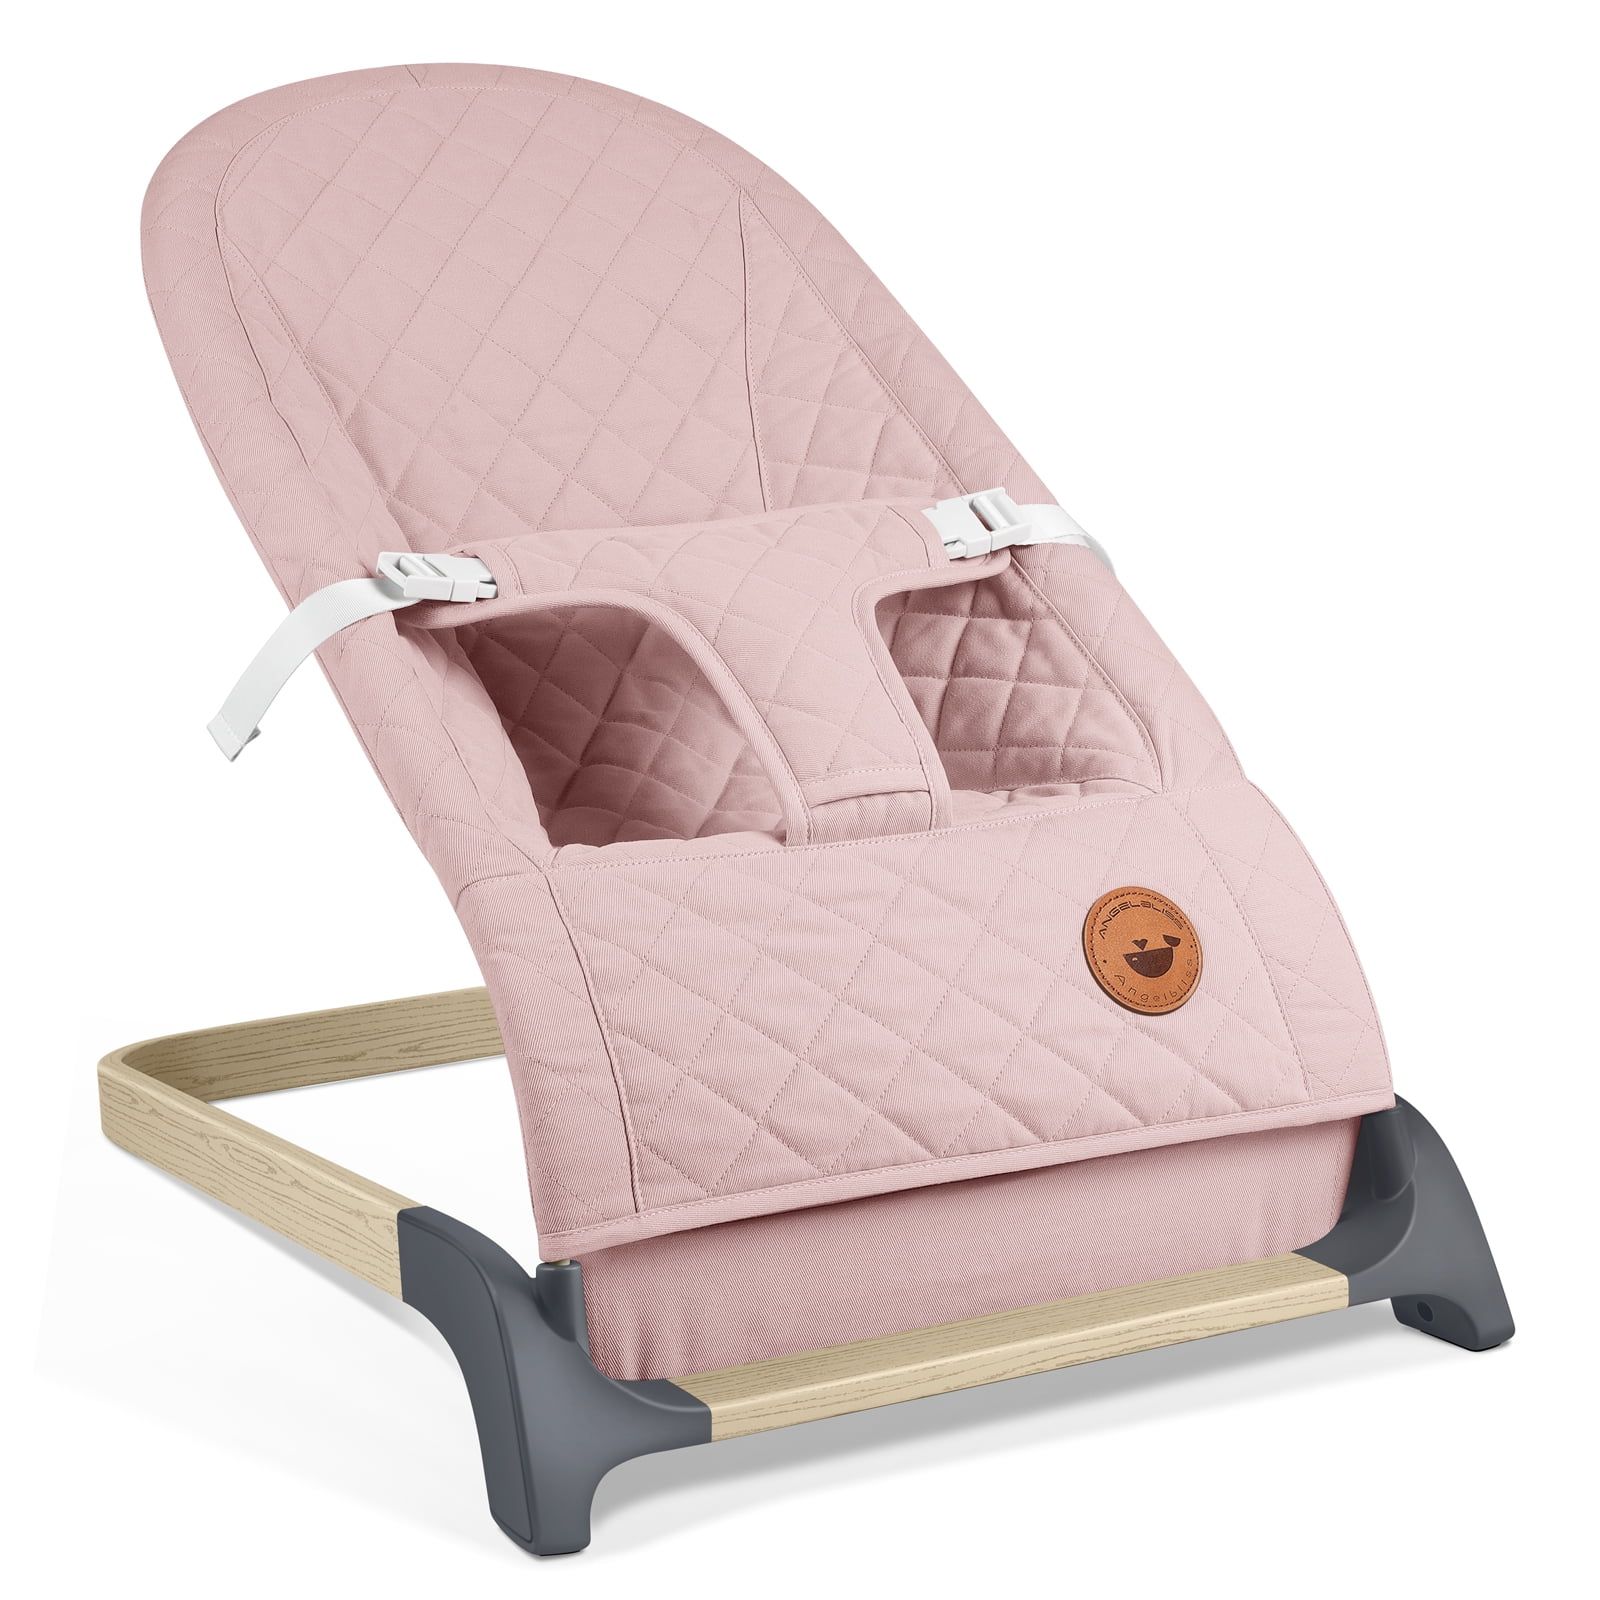 ANGELBLISS Baby Bouncer, Portable Bouncer Seat for Babies, Infants Bouncy Seat with Mesh Fabric, ... | Walmart (US)